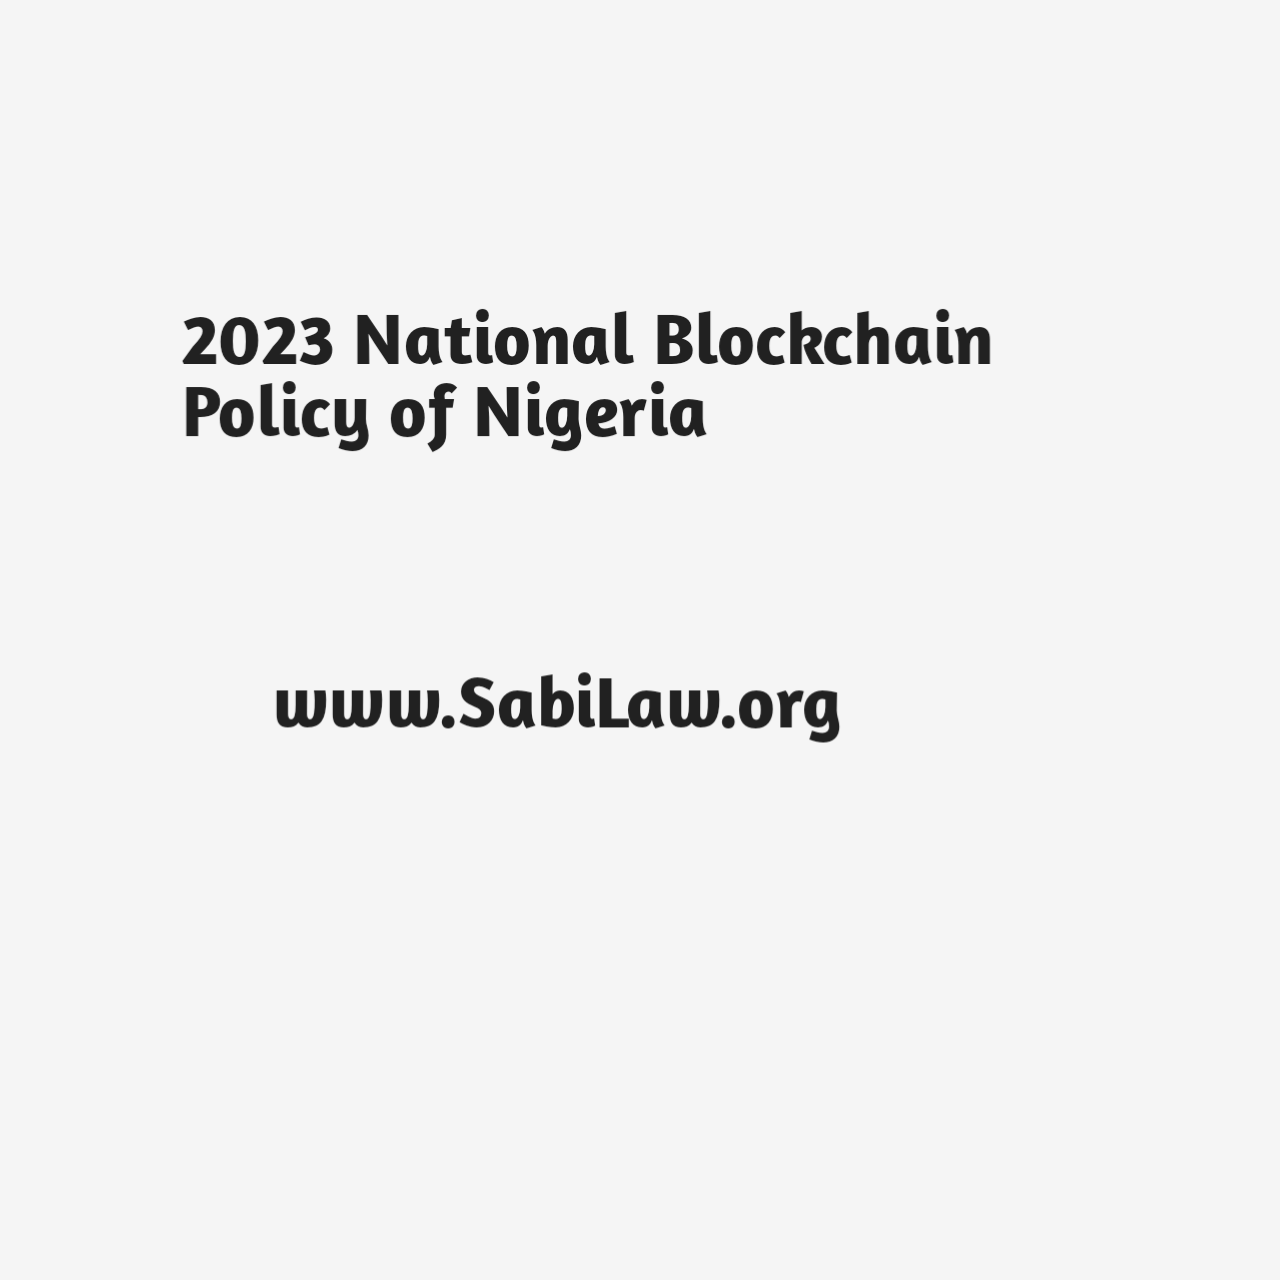 Copy of the 2023 National Blockchain Policy of Nigeria